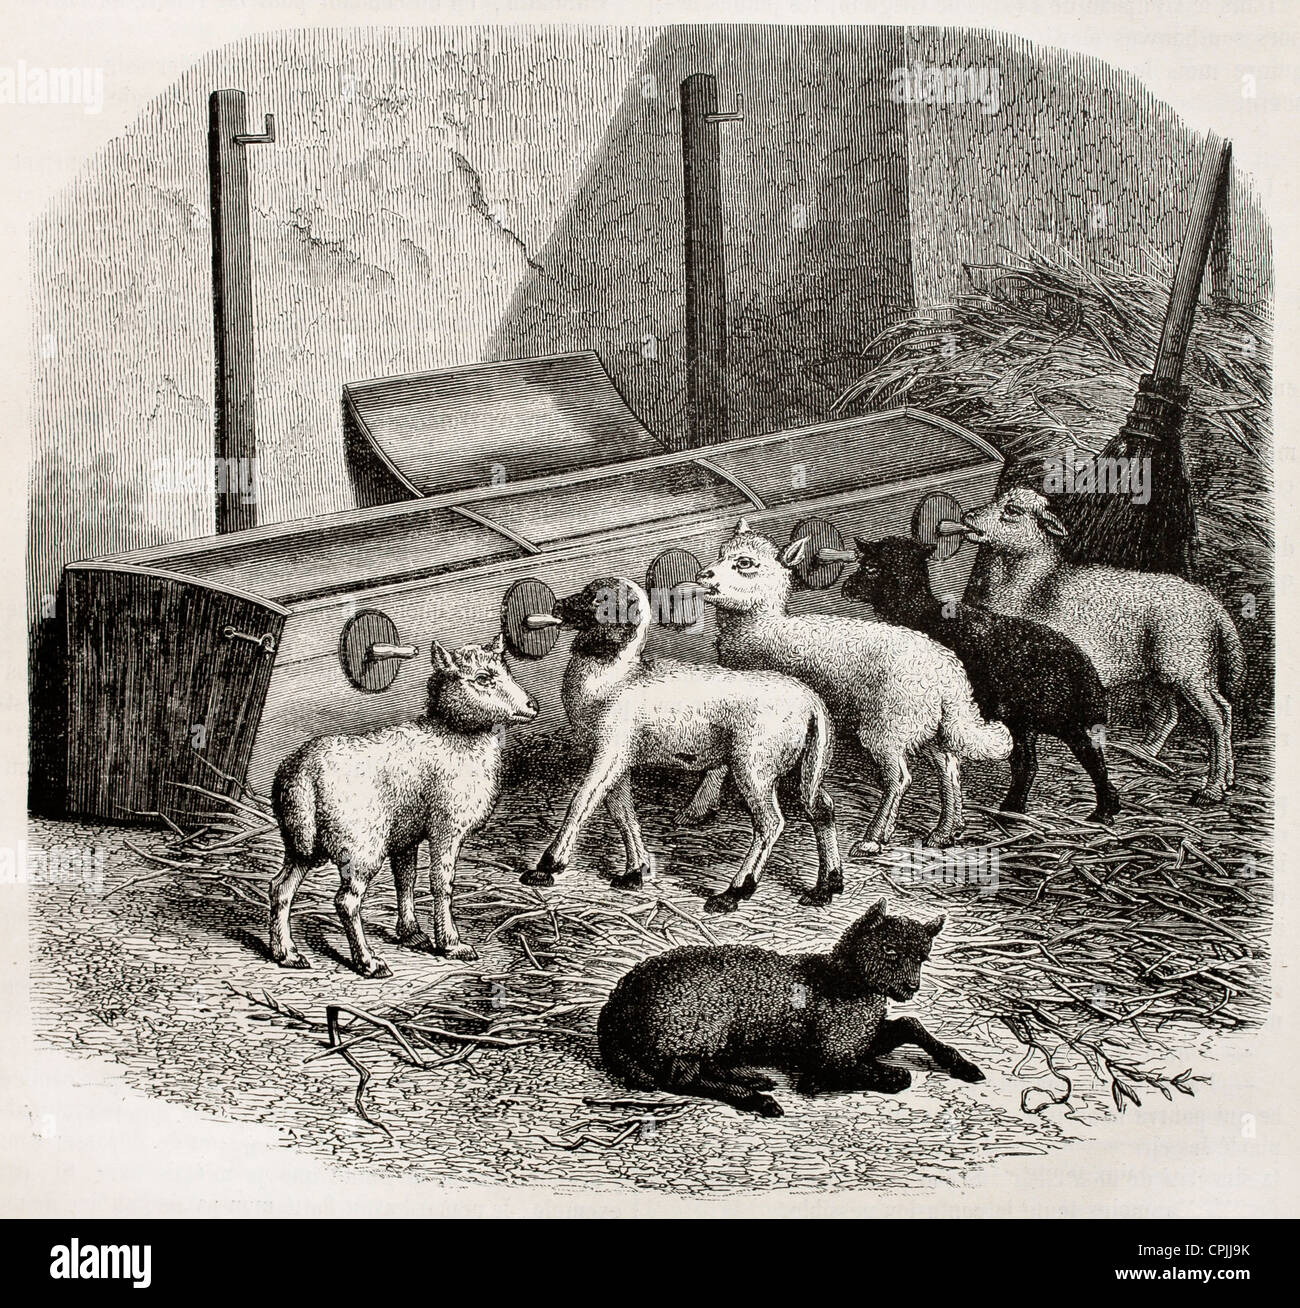 Lambs milk feeding in a stable, old illustration Stock Photo